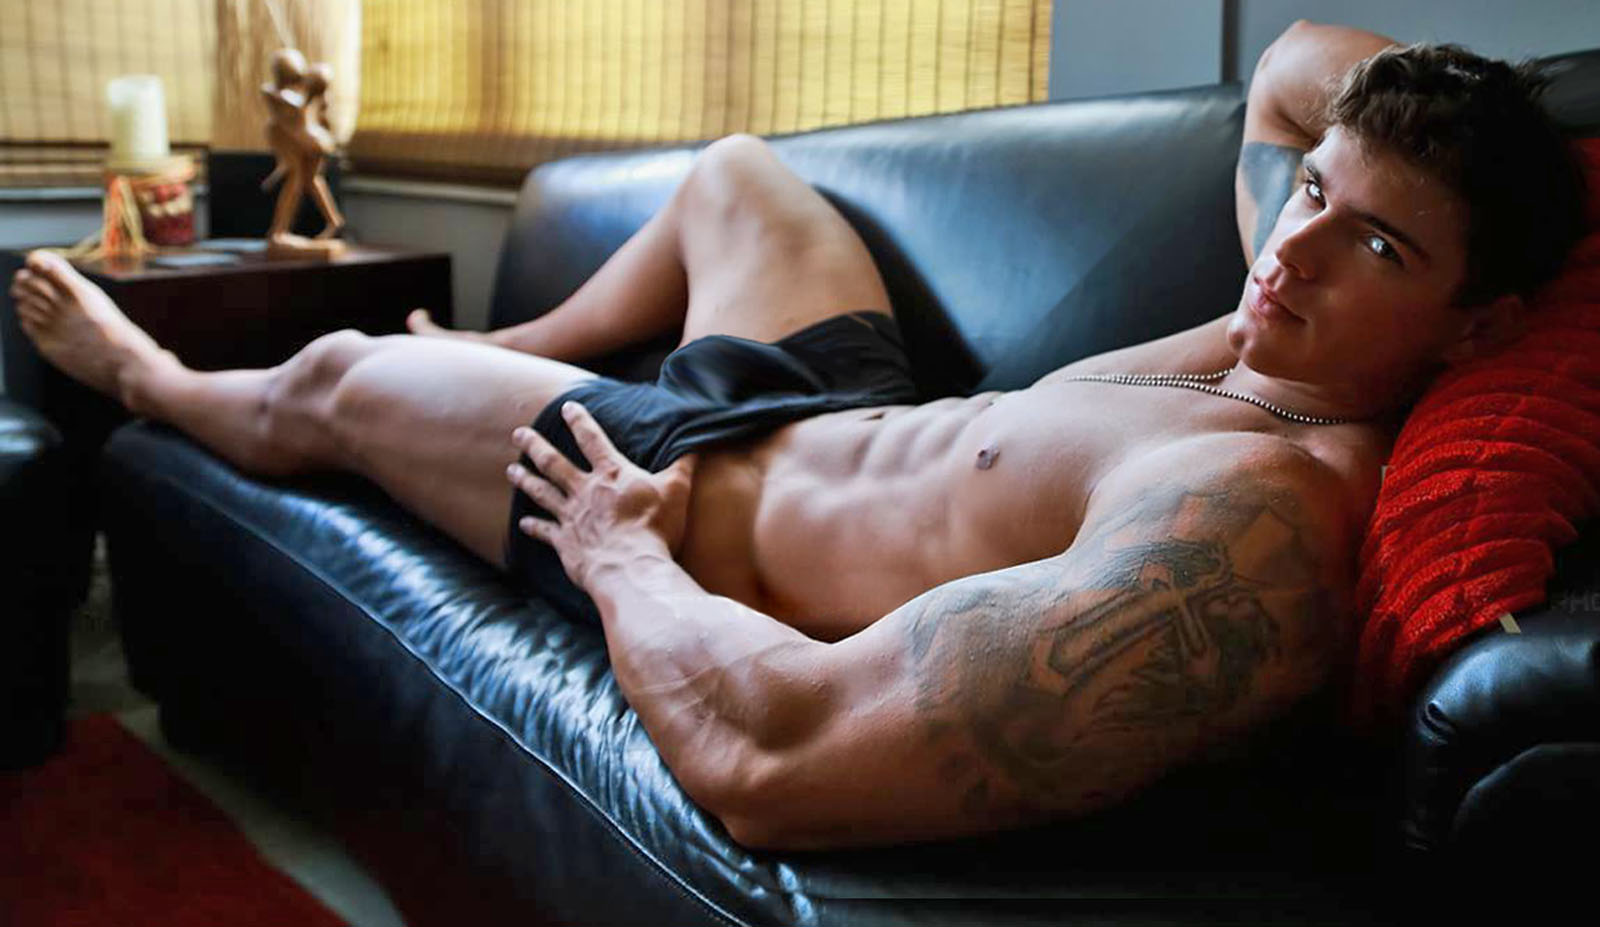 10 Inches of Intense Pleasure: A Gallery of Well-Endowed Hunks